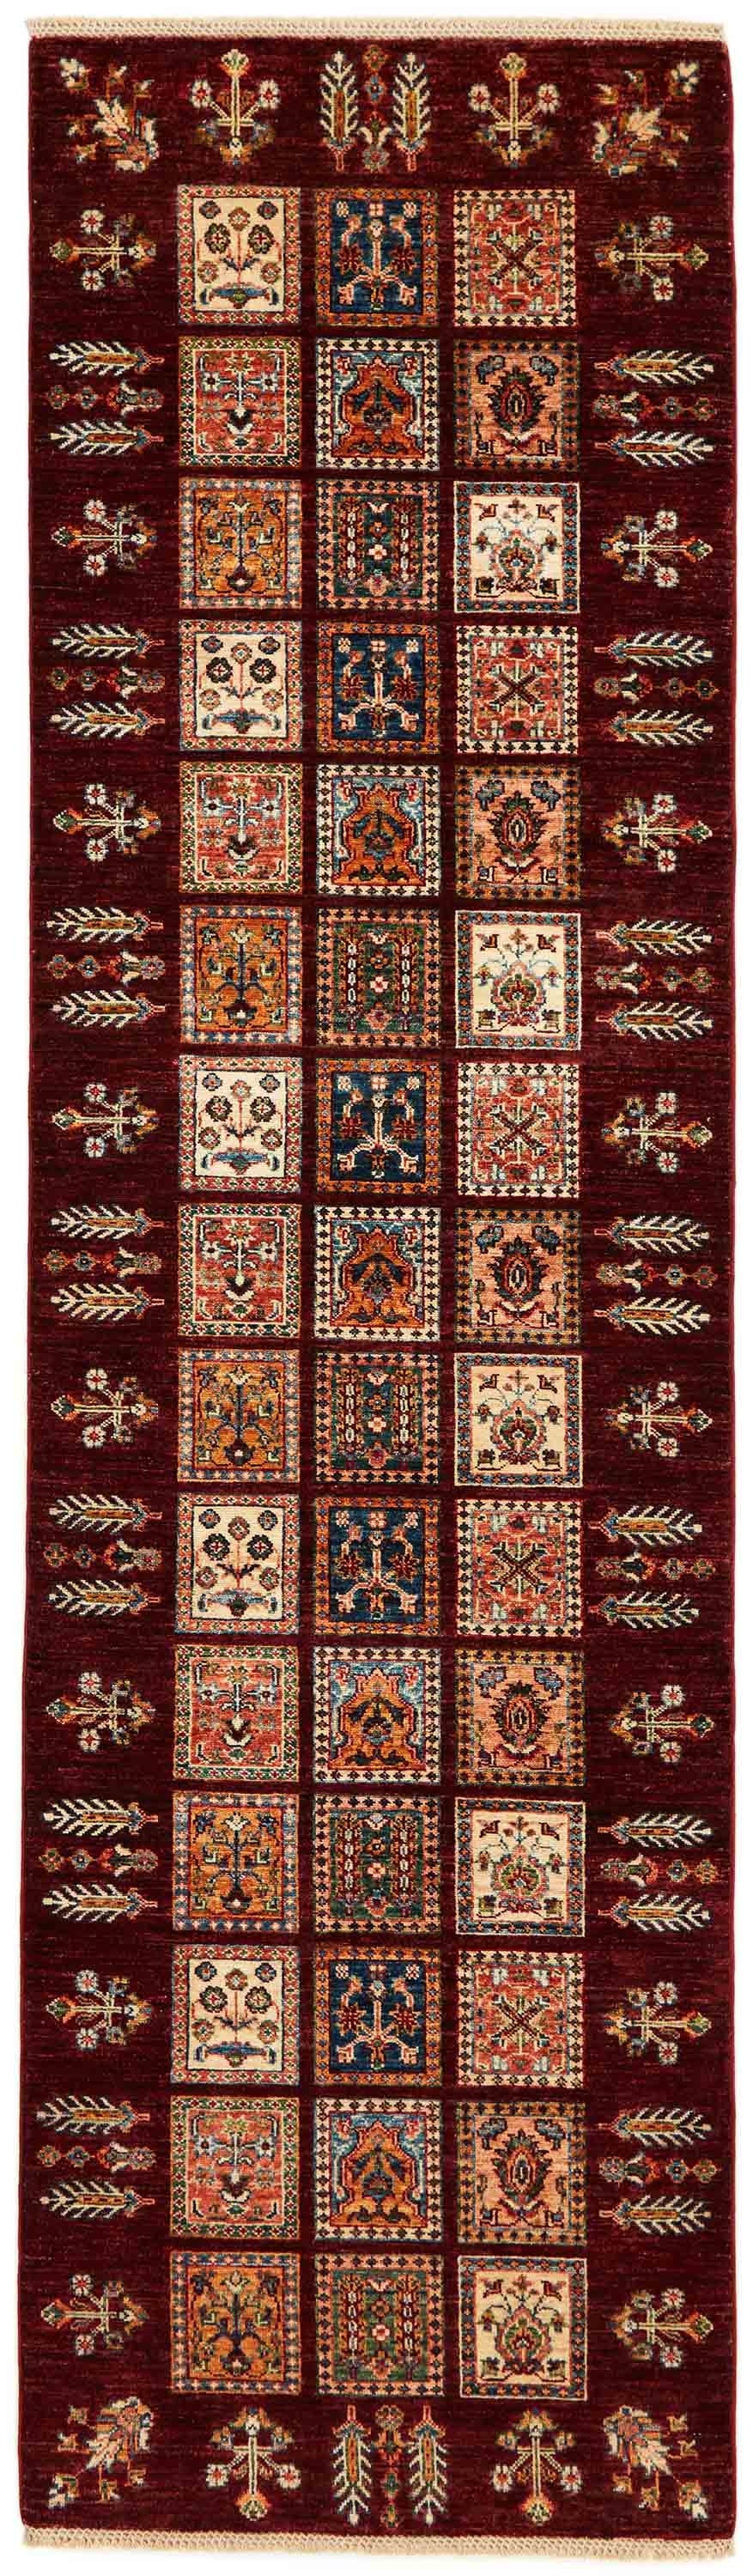 Authentic oriental runner with traditional pattern in red, orange, yellow, blue, green, beige and brown